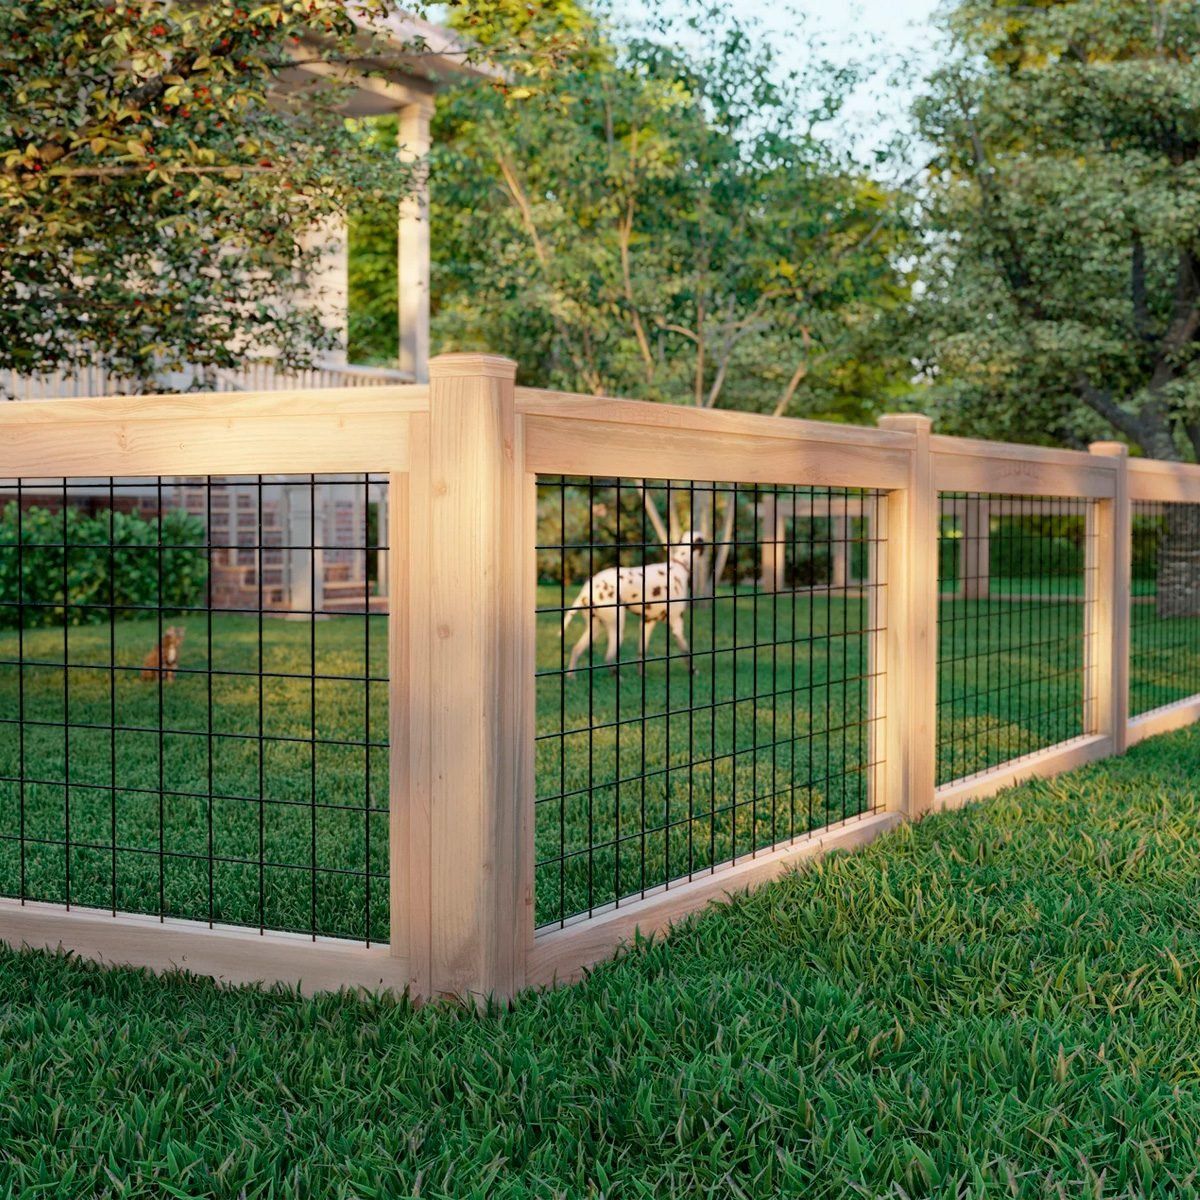 Creative Ways to Enhance Your Yard with Beautiful Fencing Options